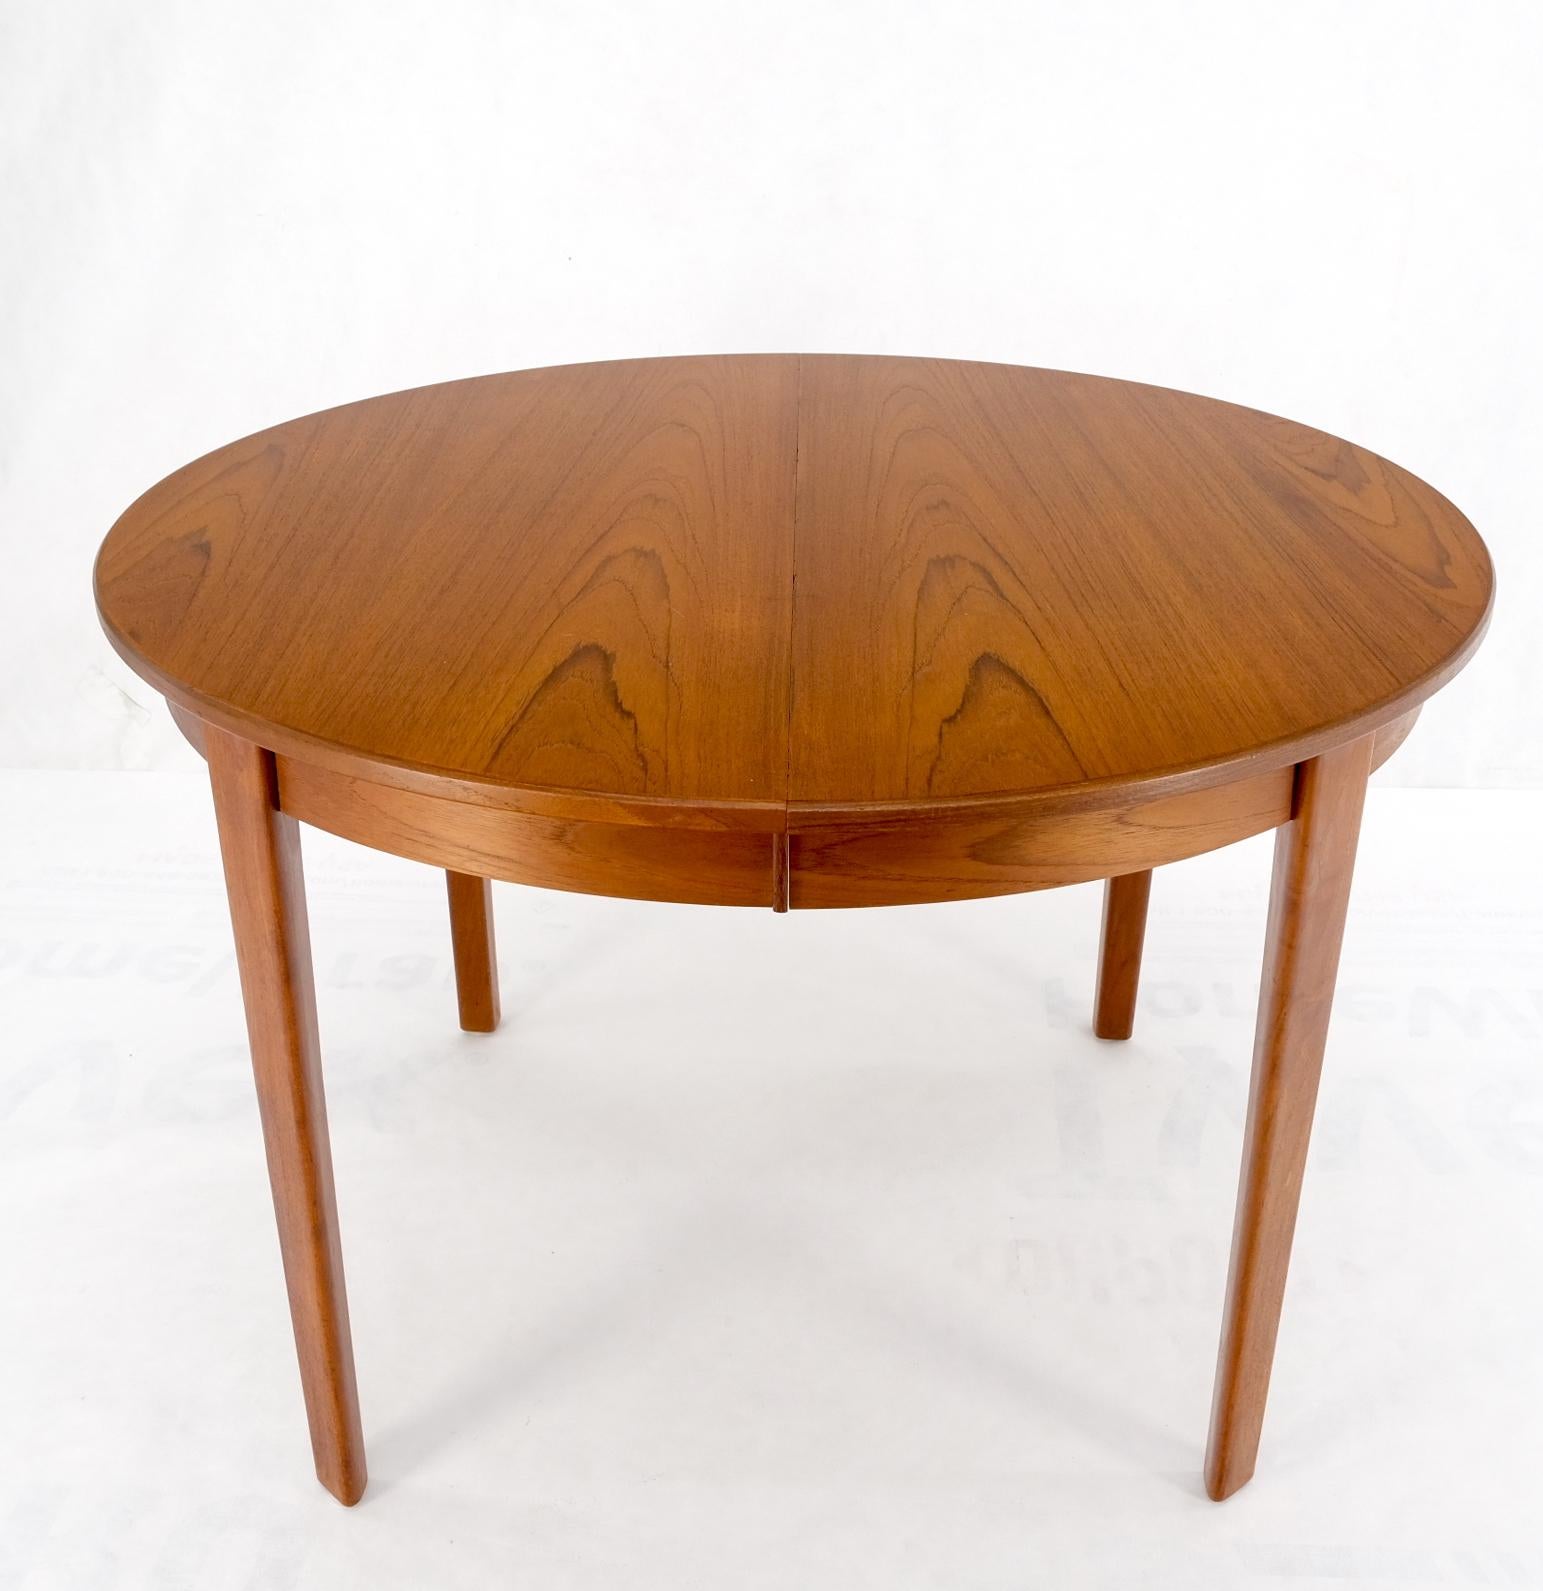 Danish Teak Mid Century Modern Round Dining Banquet Conference Table 4 Leaf MINT
Four leaves measuring 20 inches across.
 Total length combines to 123